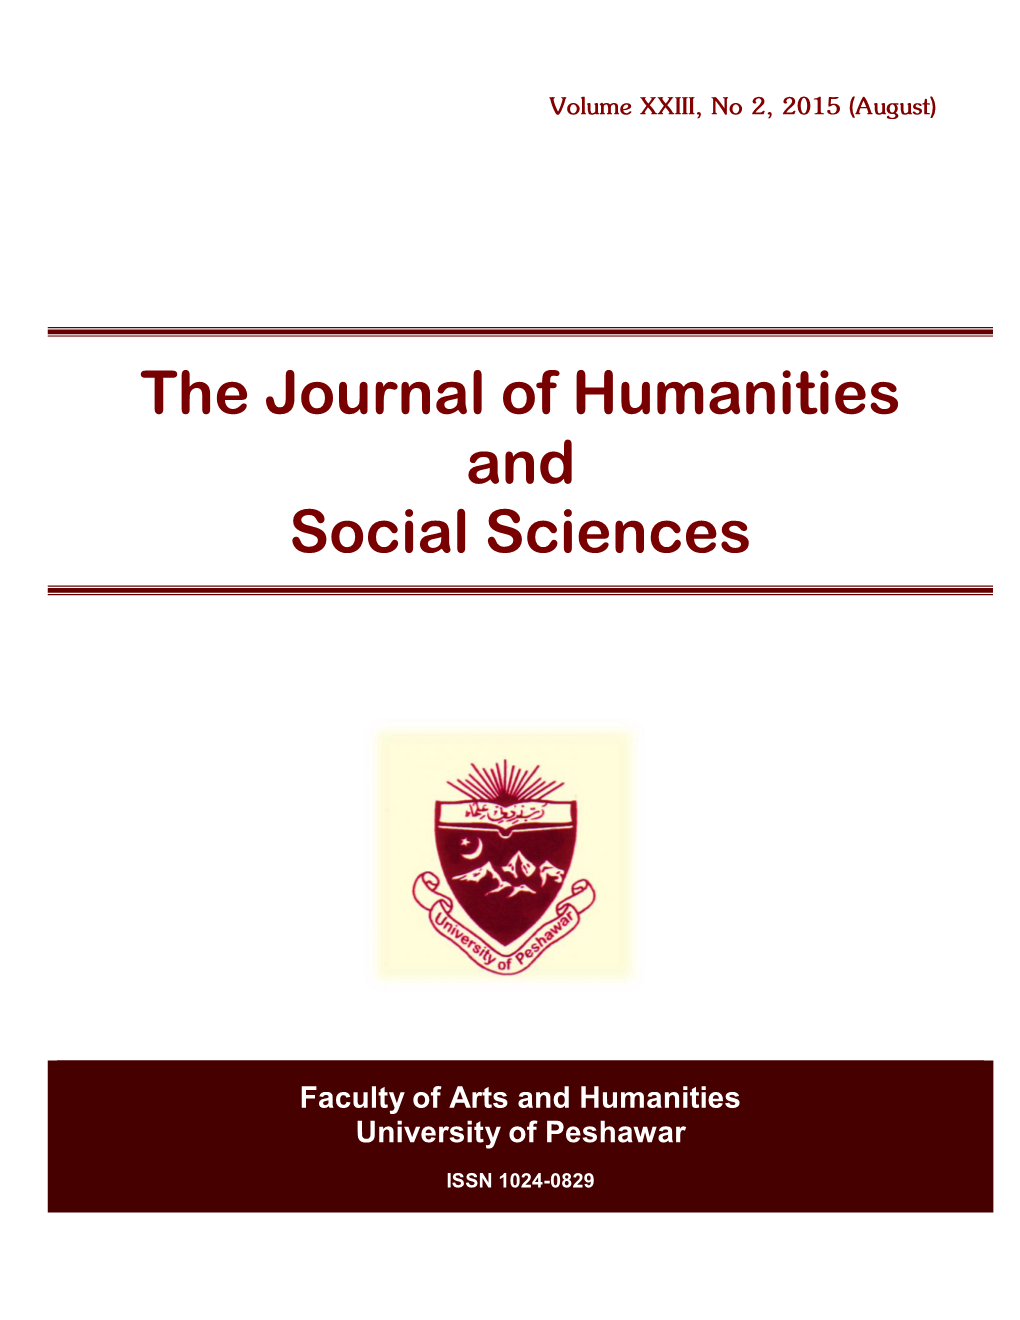 The Journal of Humanities and Social Sciences